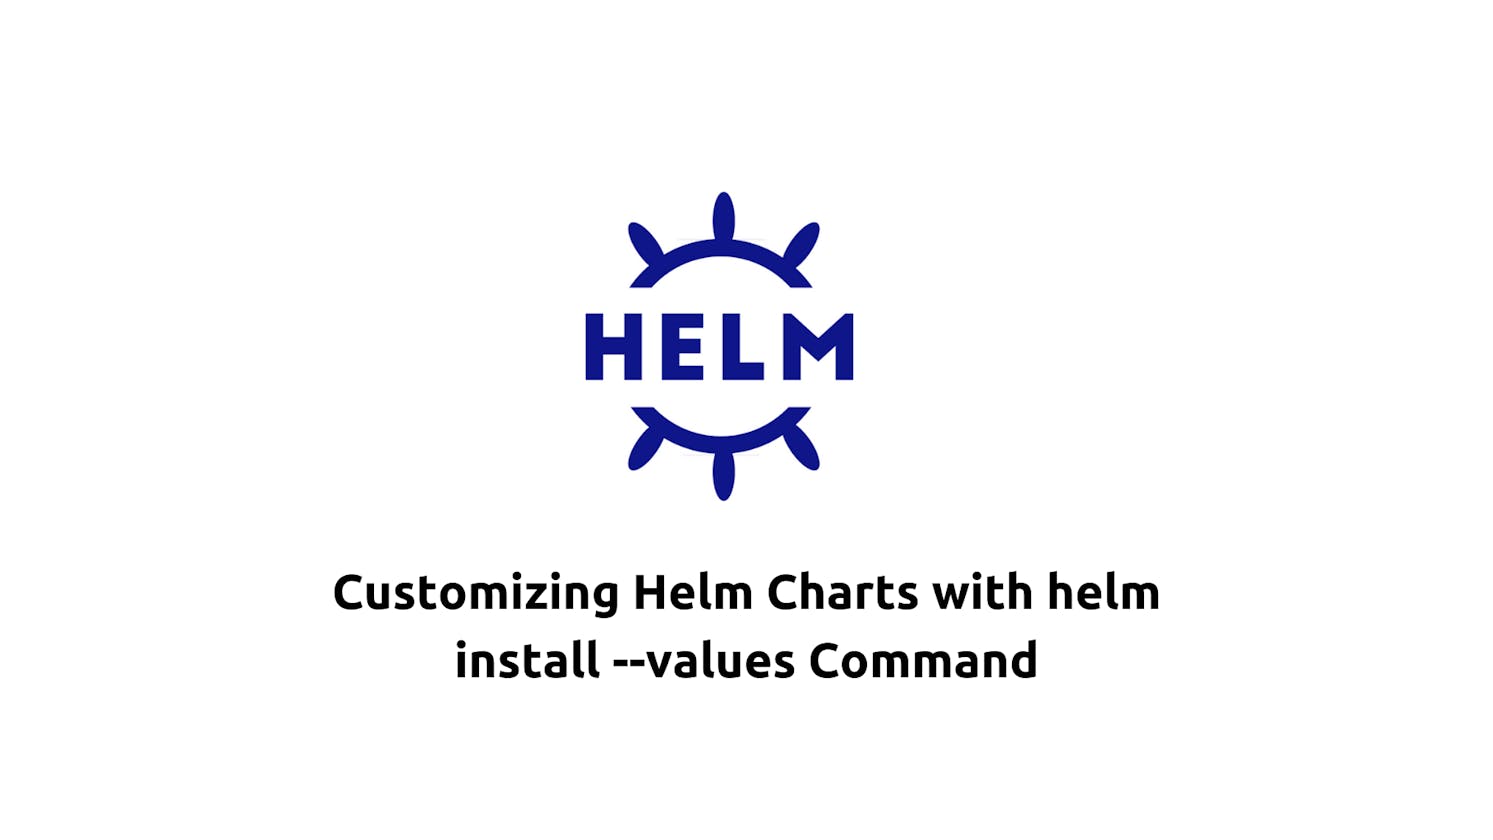 Customizing Helm Charts with helm install --values Command